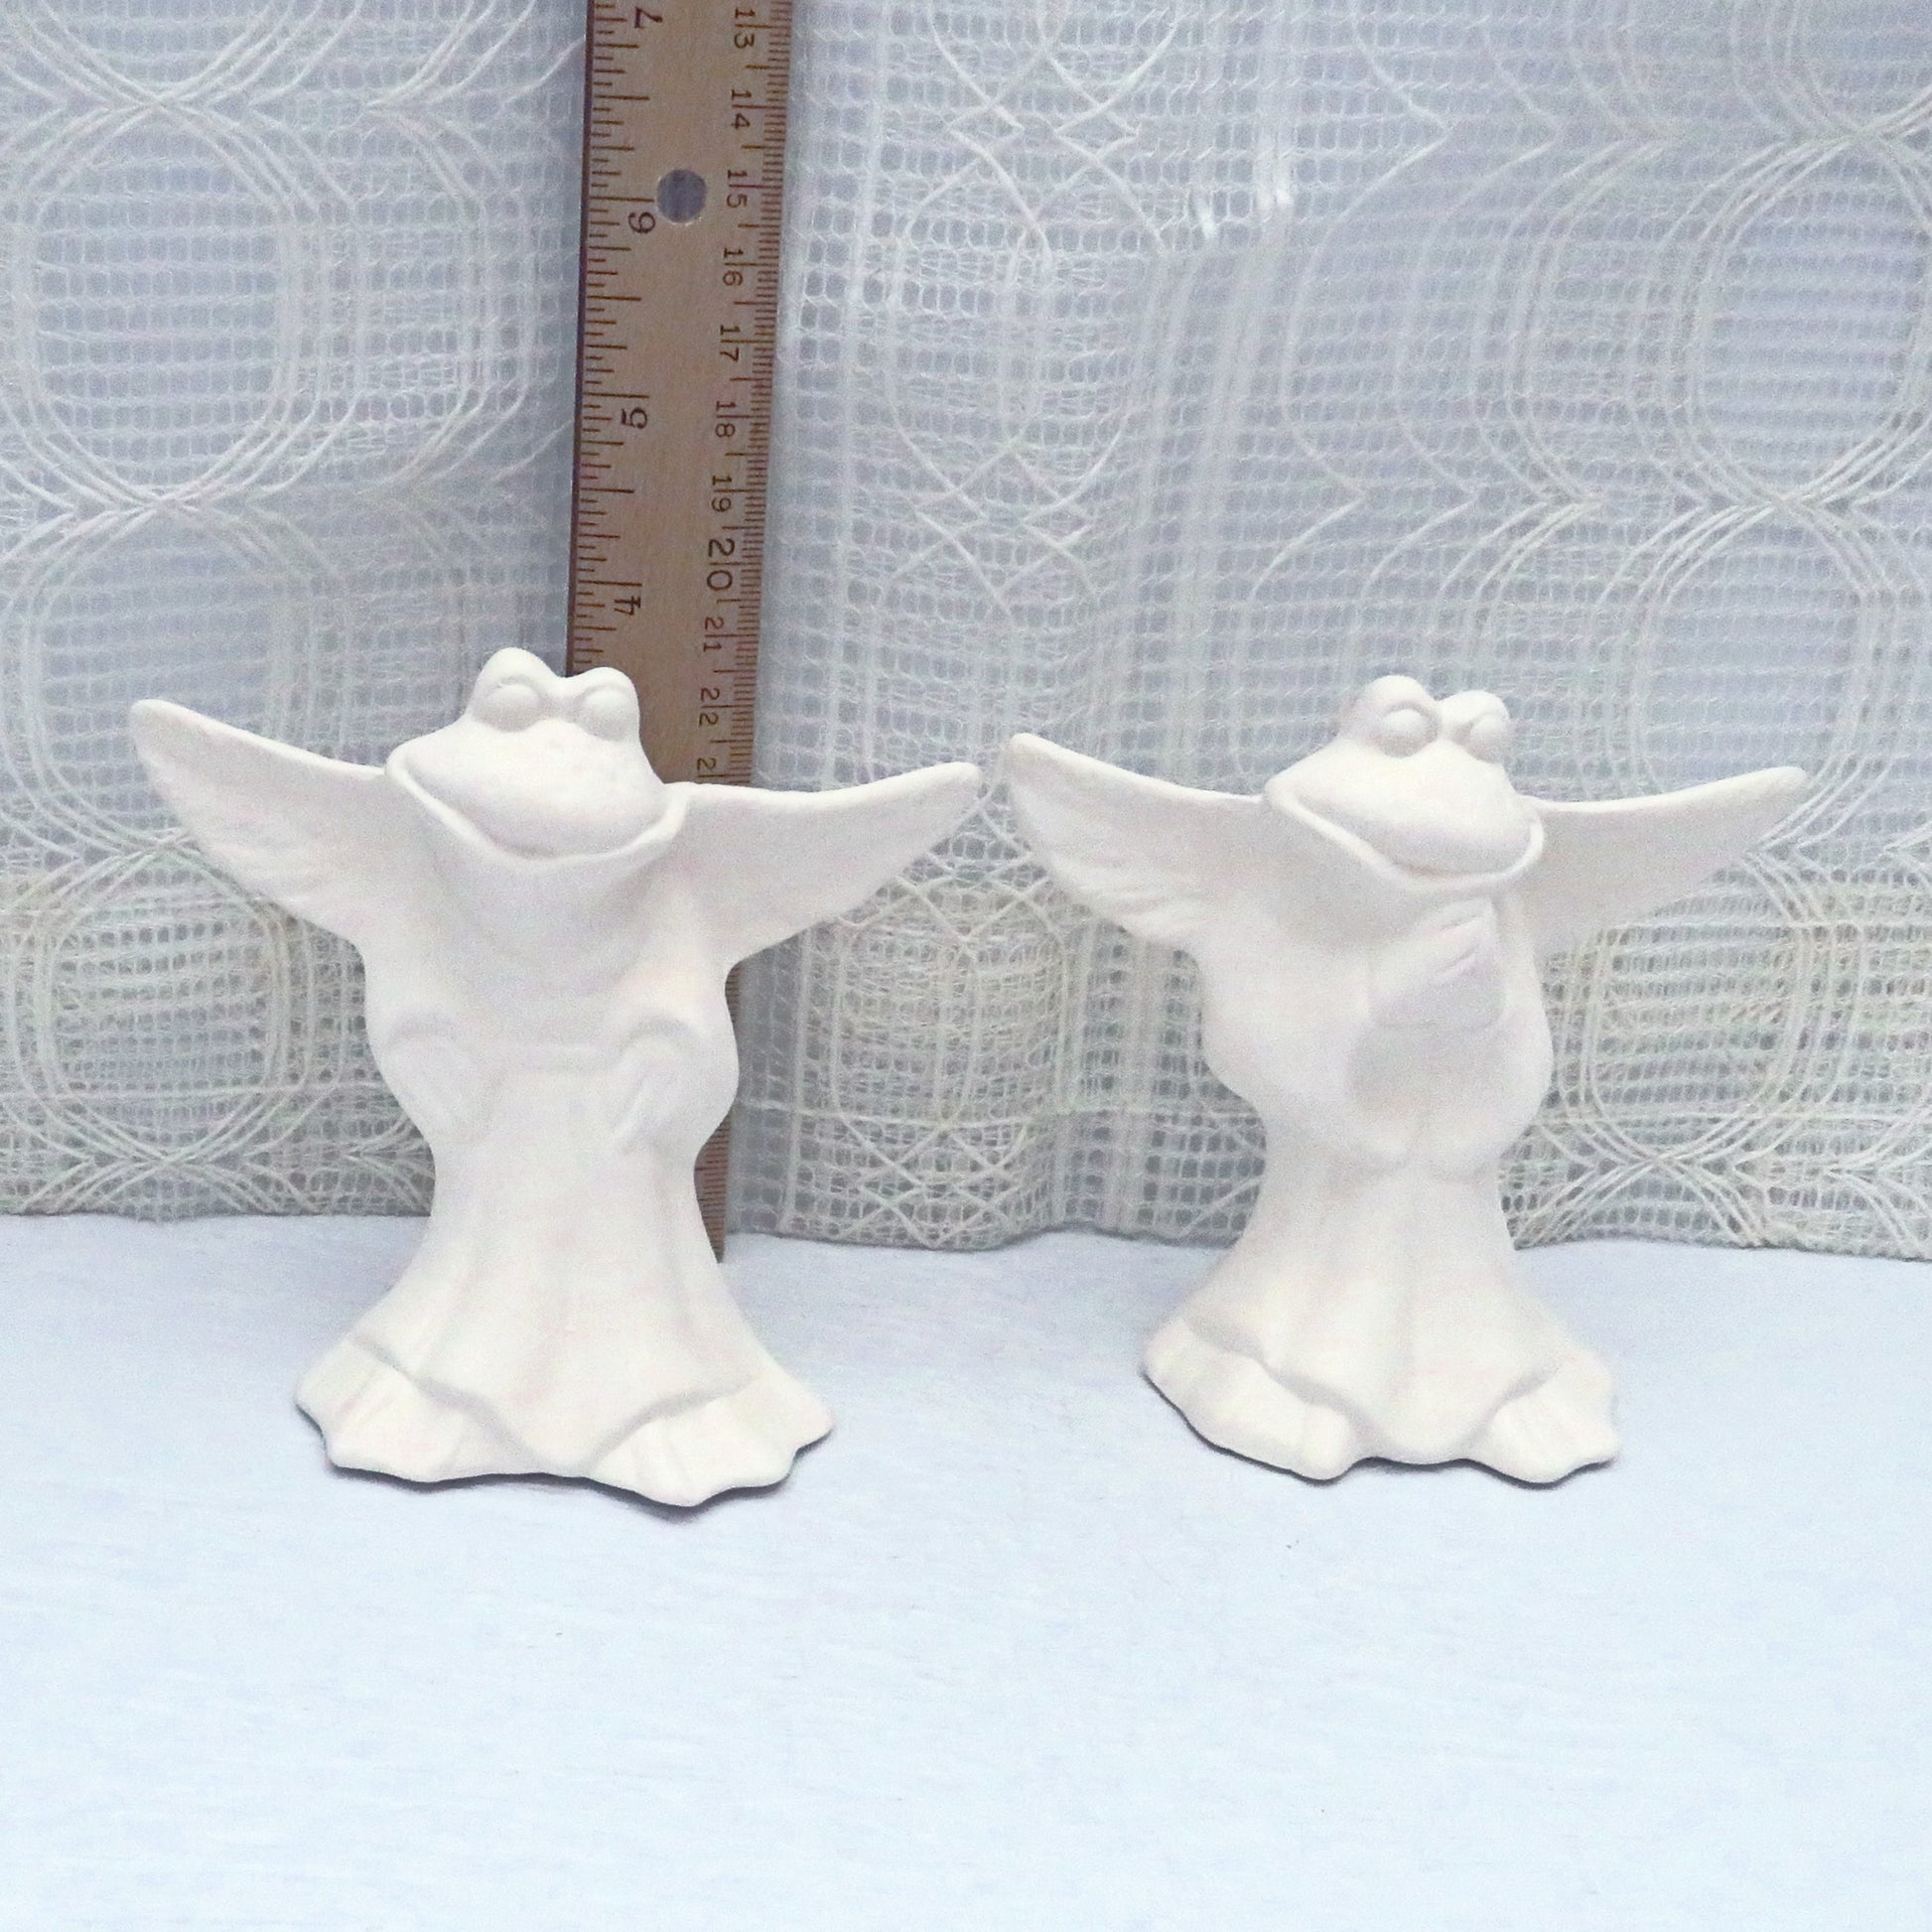 2 ready to paint ceramic frog angel figurines in front of the ruler showing them to be almost 4 inches tall